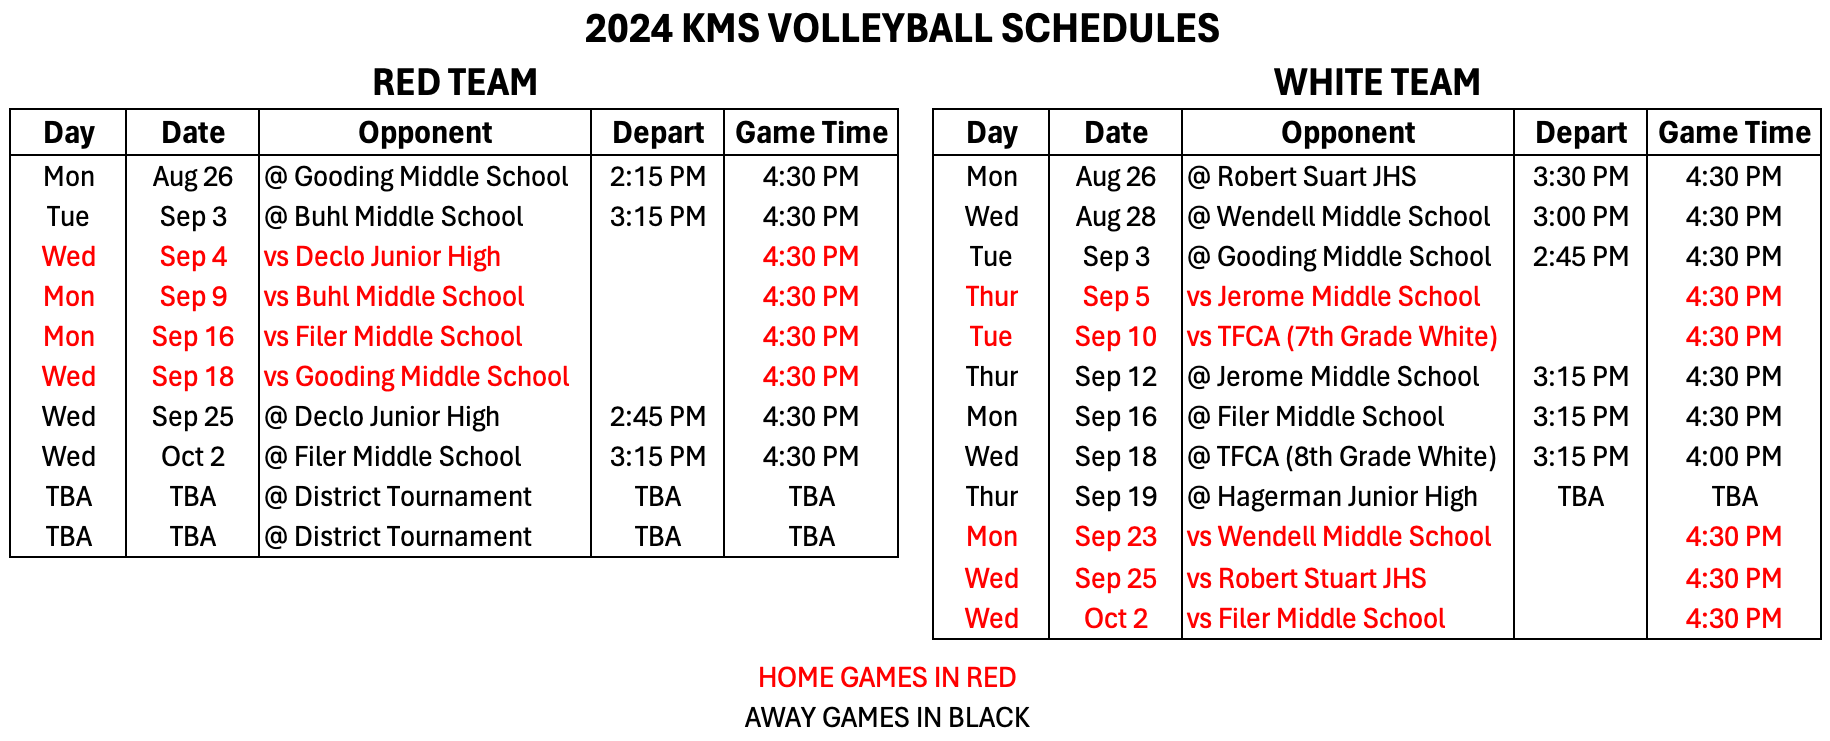 2024 KMS Volleyball Schedules